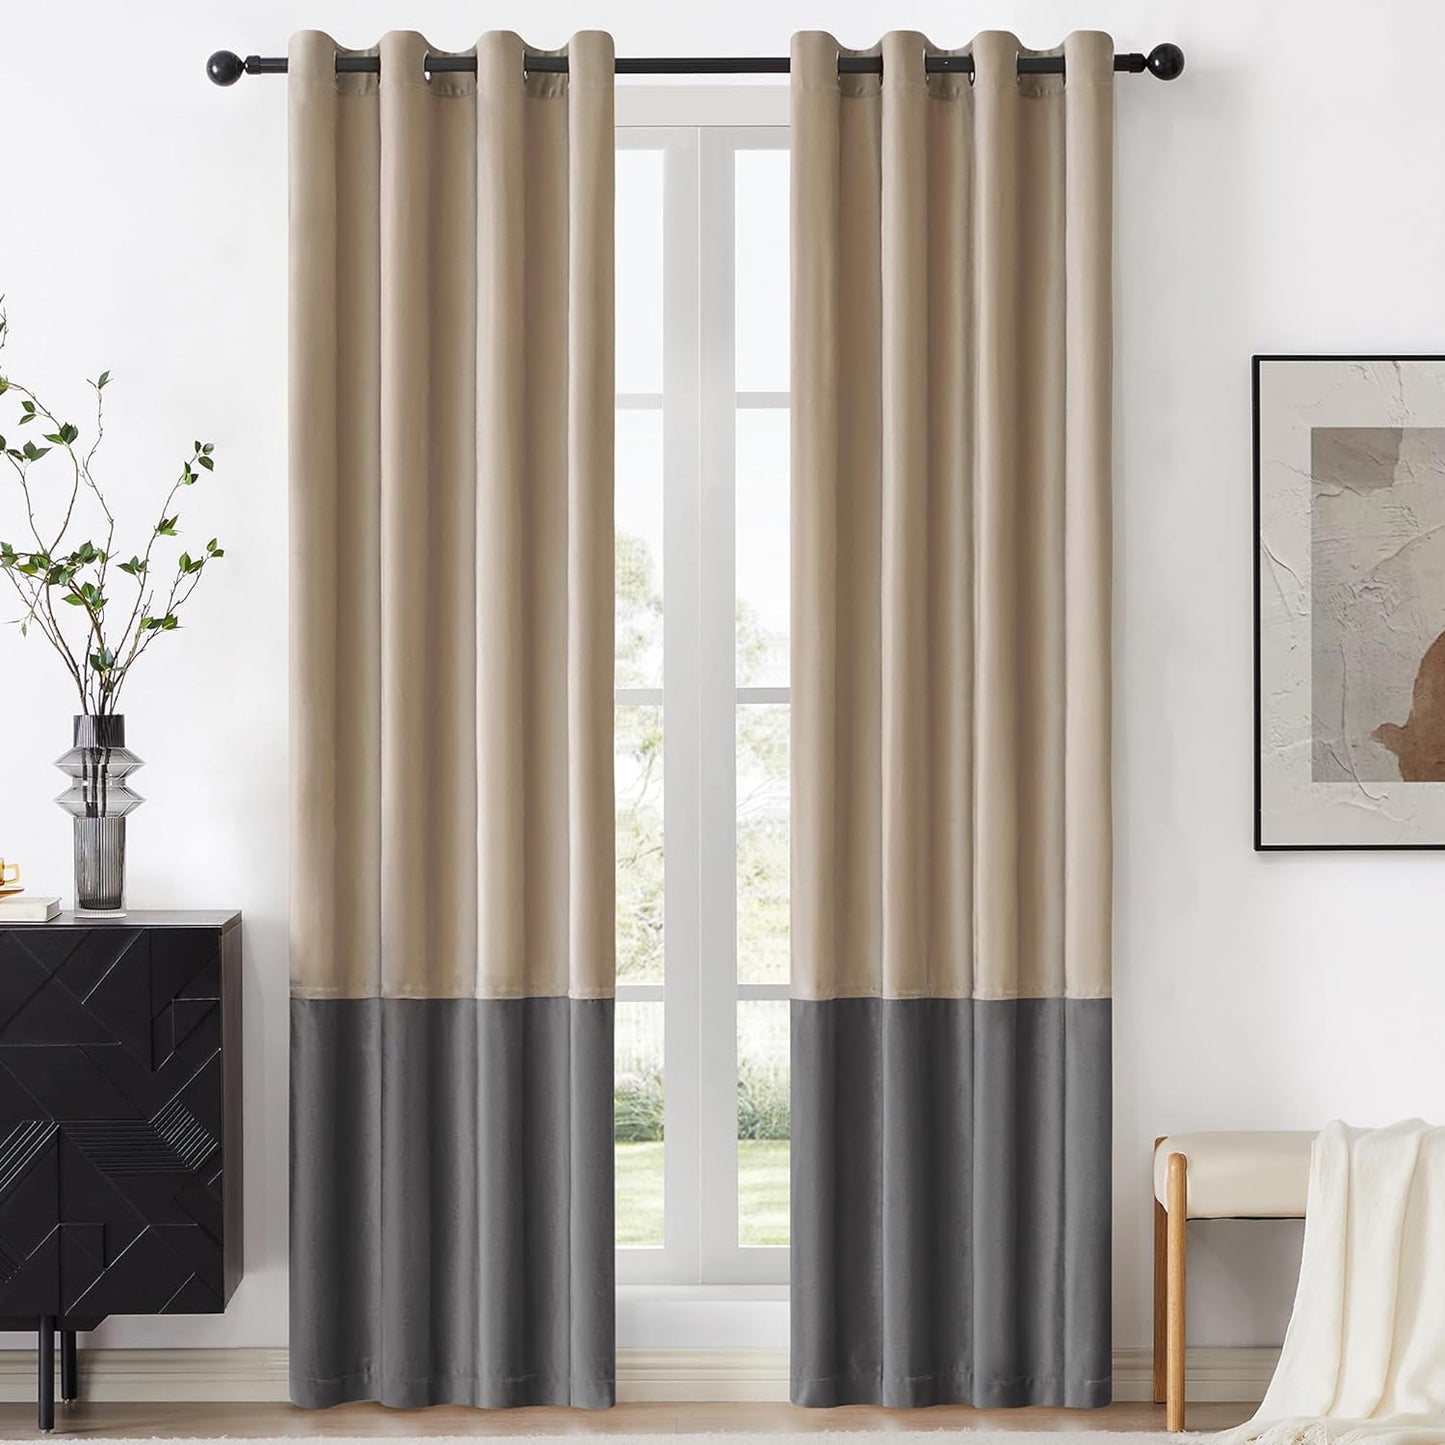 BULBUL Color Block Window Curtains Panels 84 Inches Long Cream Ivory Gold Velvet Farmhouse Drapes for Bedroom Living Room Darkening Treatment with Grommet Set of 2  BULBUL Champagne  Grey 52"W X 84"L 